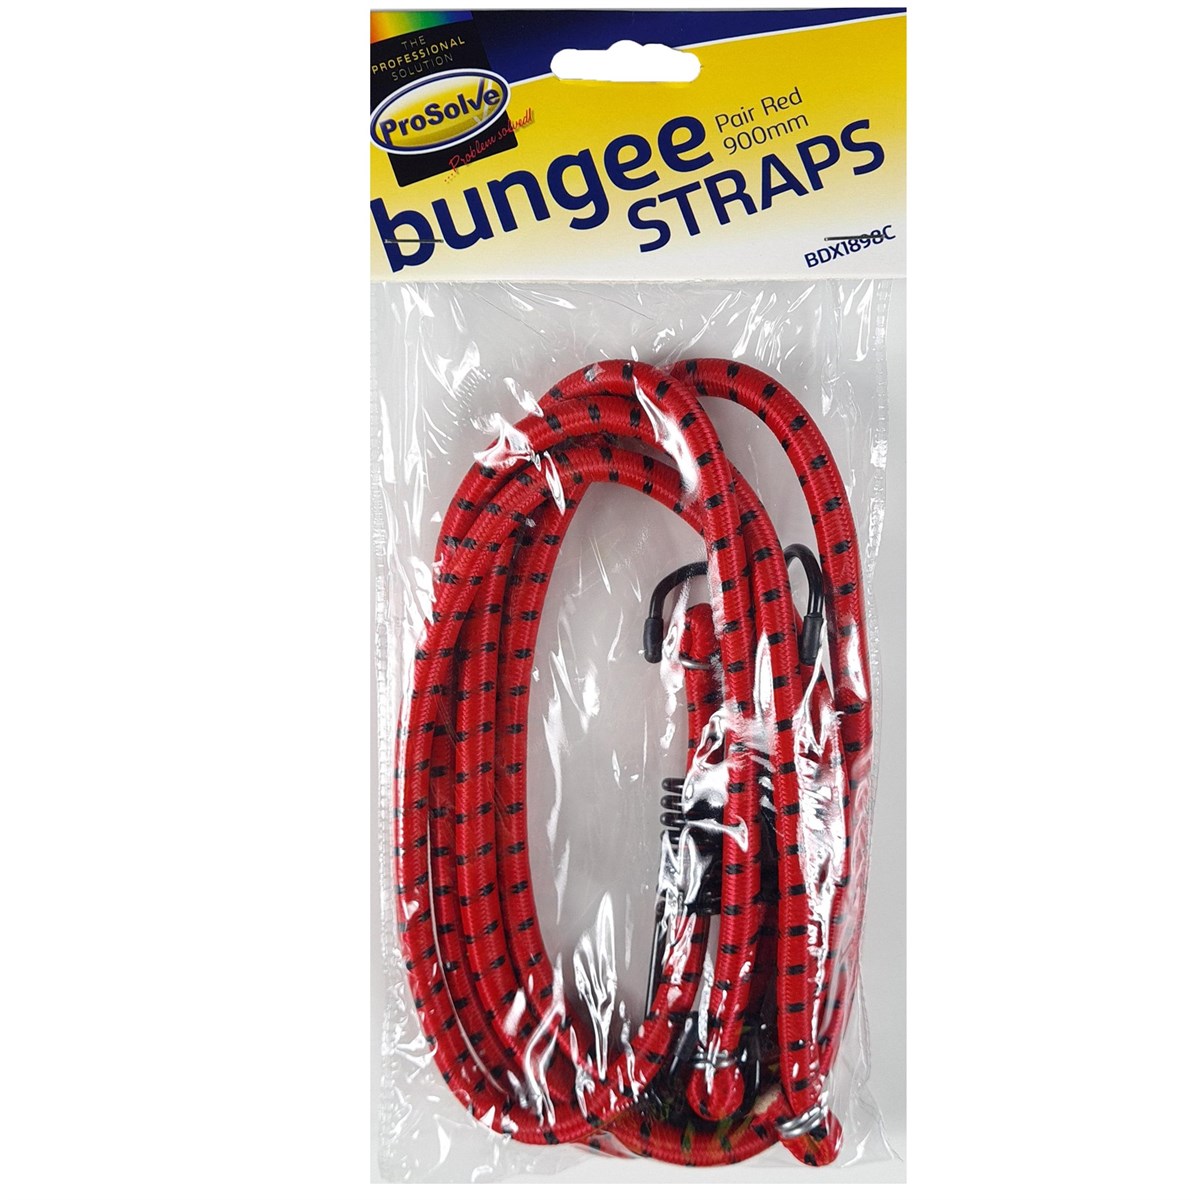 900mm Bungee Strap, Red (Twin Pack)